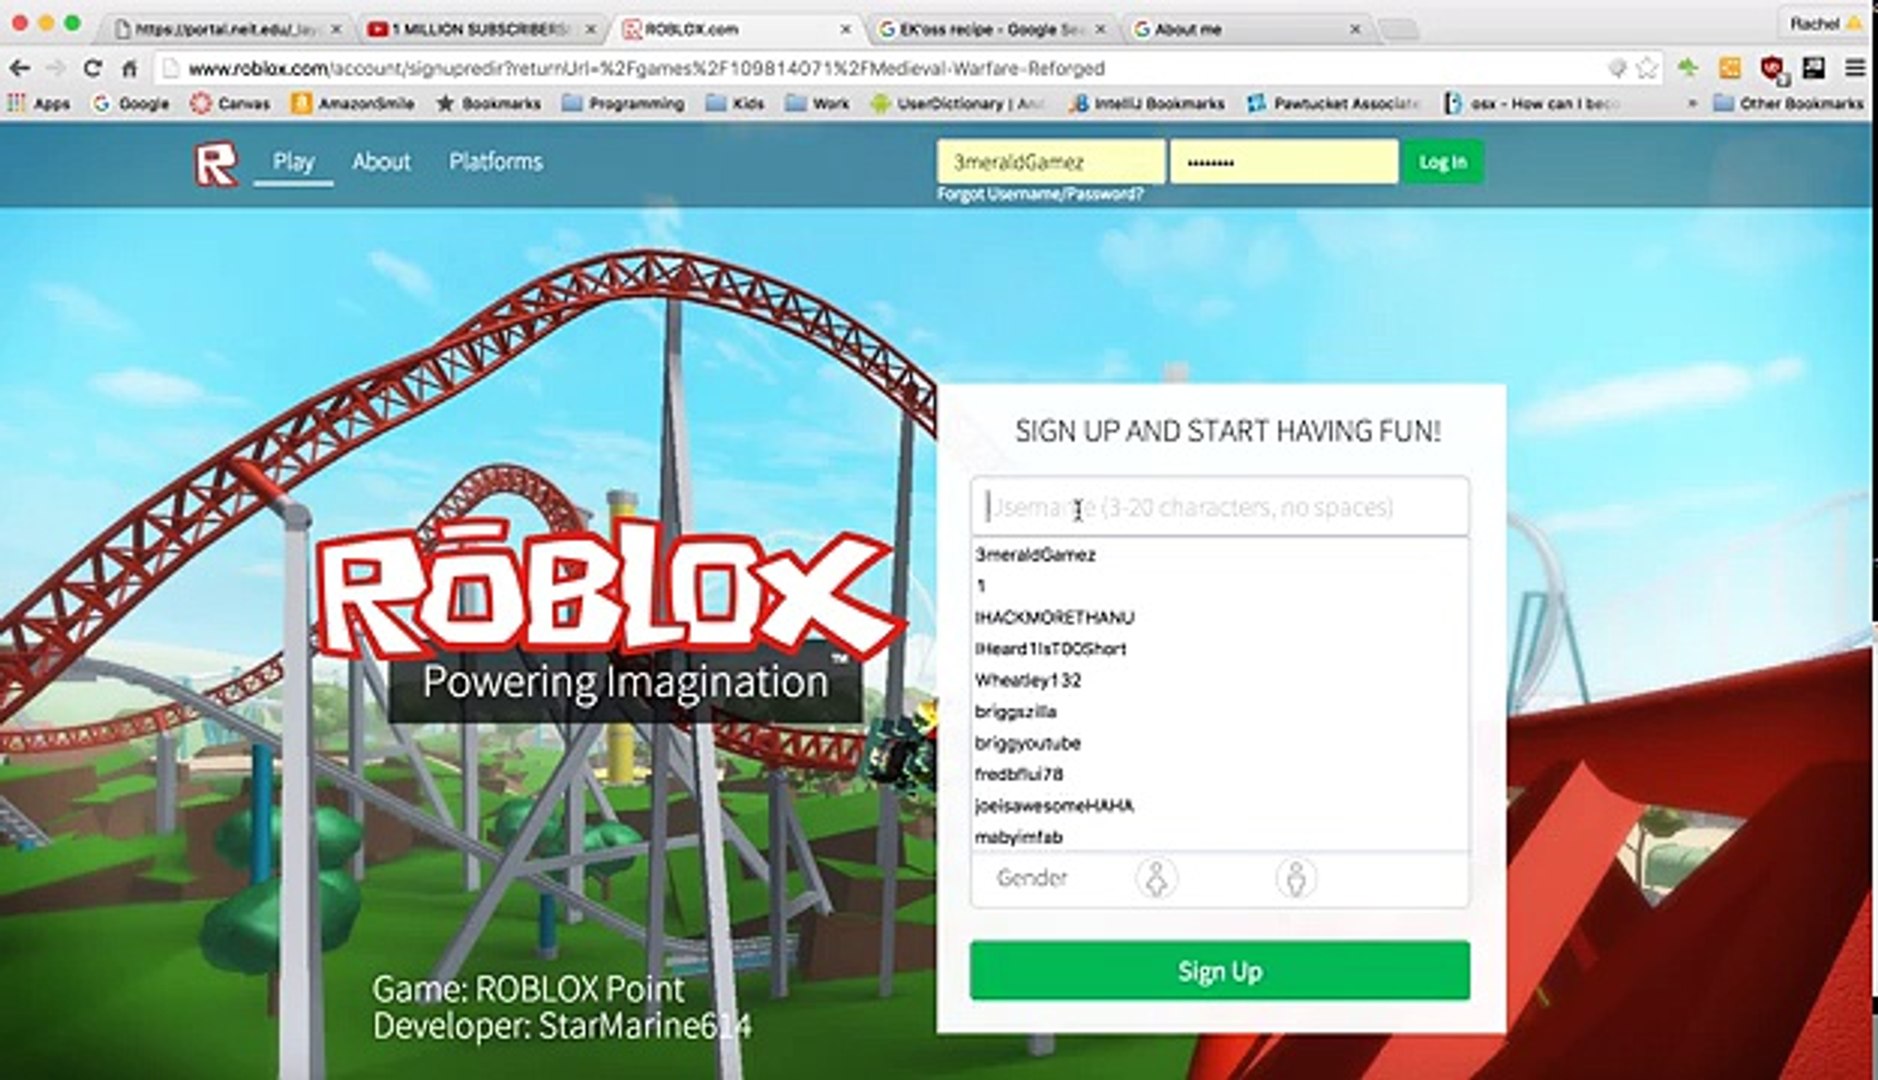 How To Lvl Up Fast In Roblox Medieval Warfare Patched On 1 - roblox exploit hack rocitizens money hack new roblox money